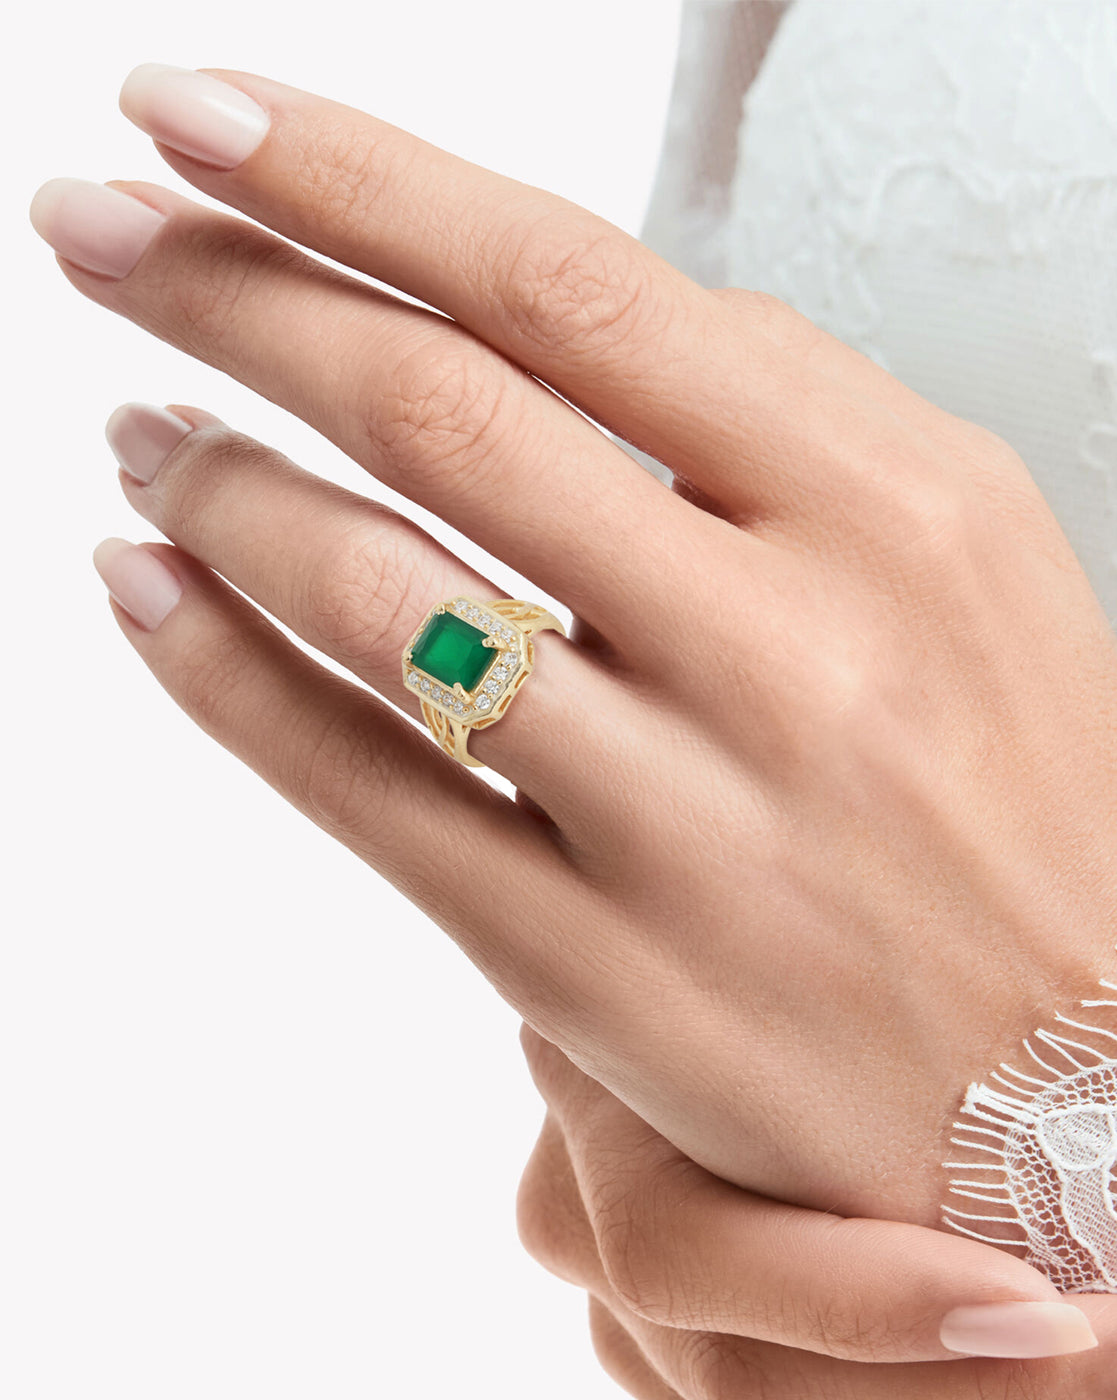 Buy Green Stone Ring by DO TAARA at Ogaan Market Online Shopping Site